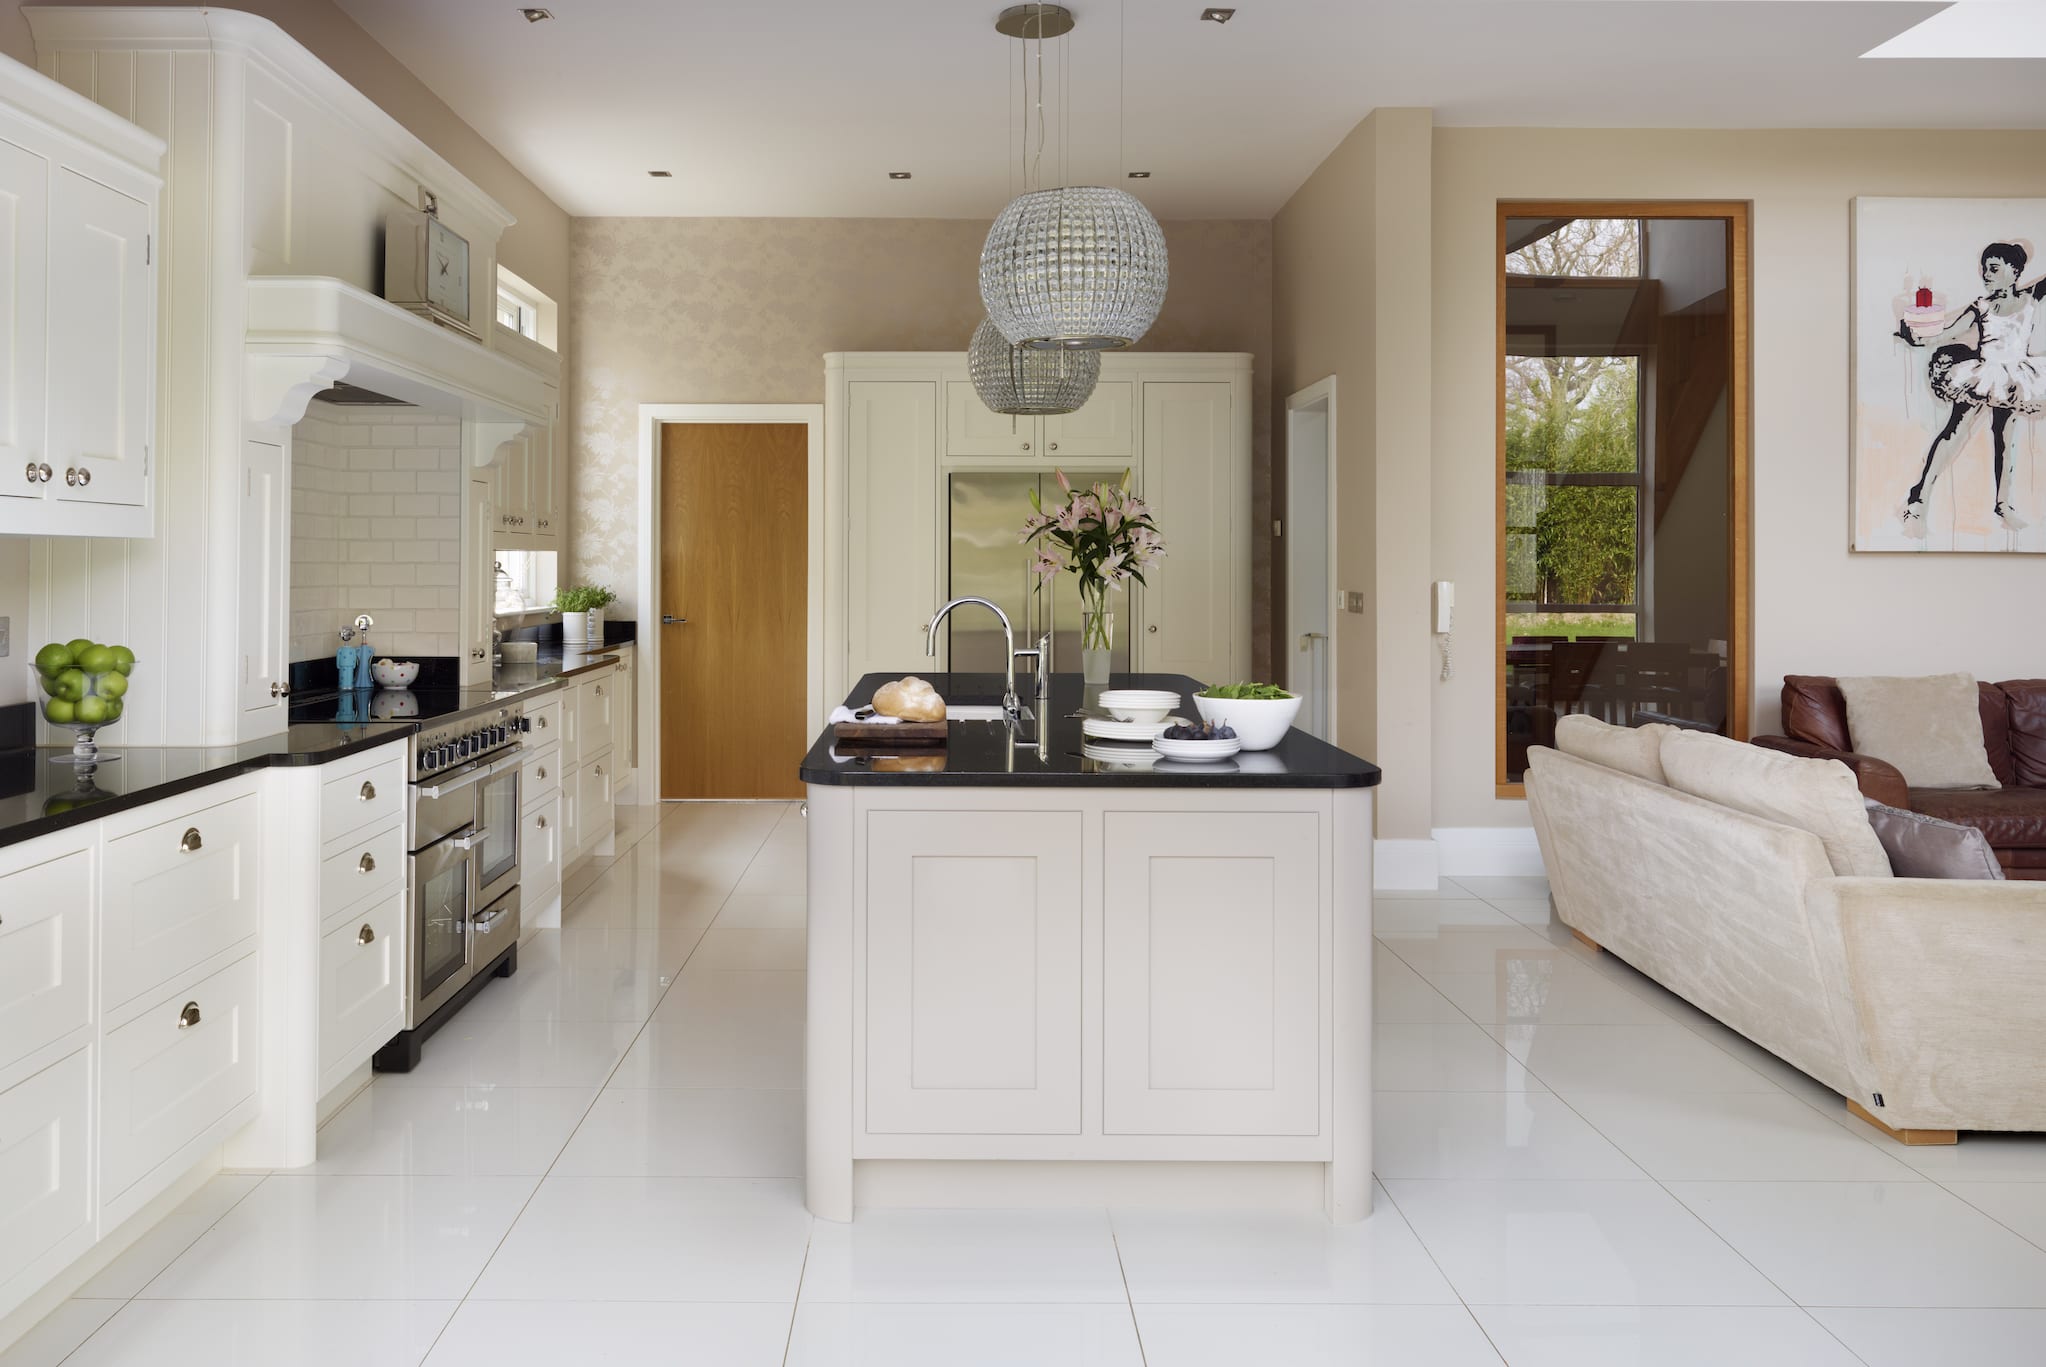 The Benefits Of Open Plan Living: Why You Should Consider It